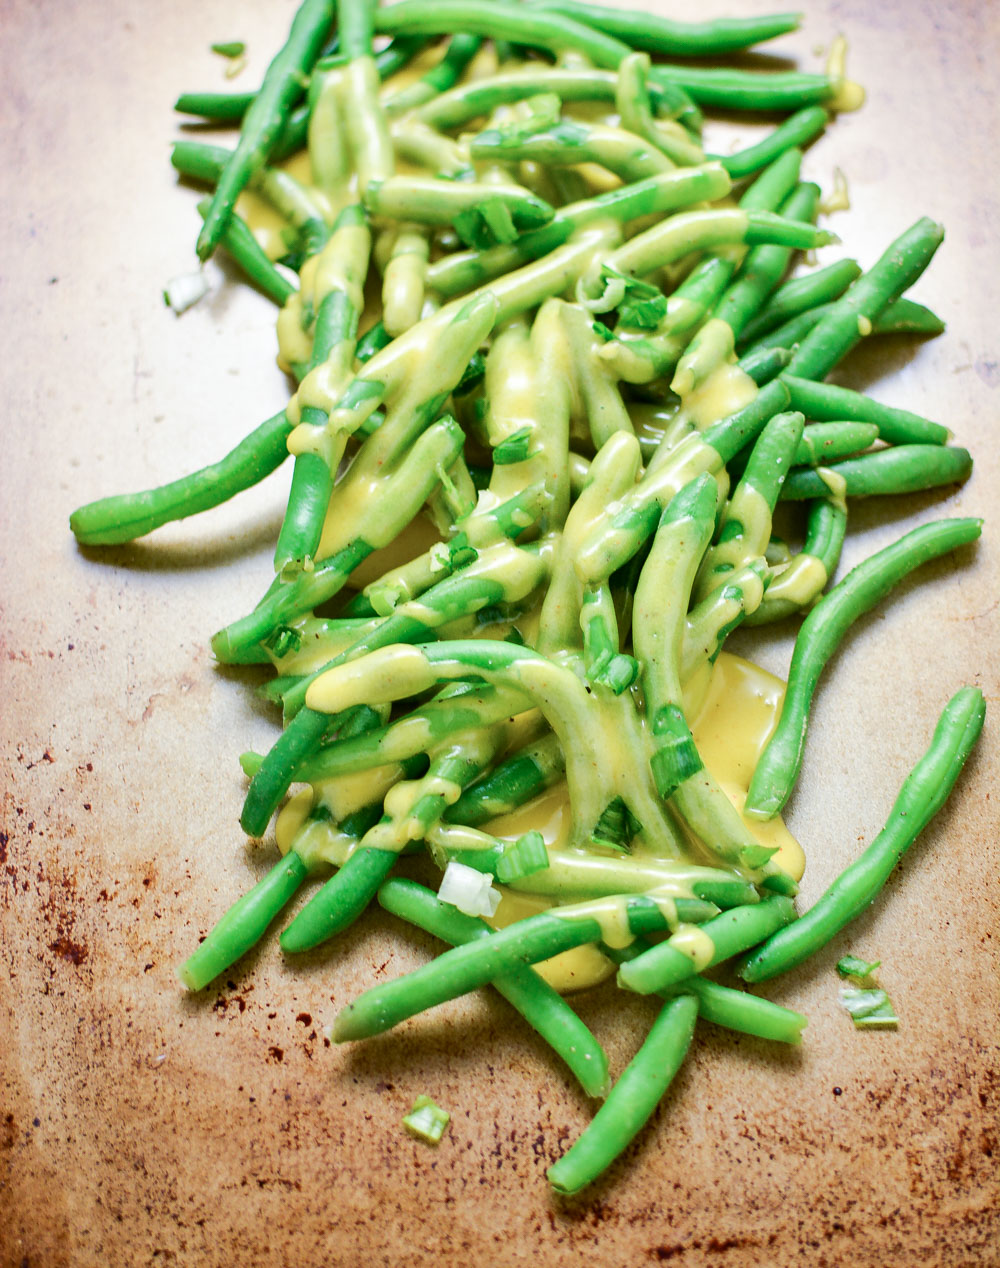 Garlic Butter Green Beans with Tarragon Cheddar Cheese Sauce are the perfect simple yet delicious side dish recipe for your Easter or Mother's Day spreads!